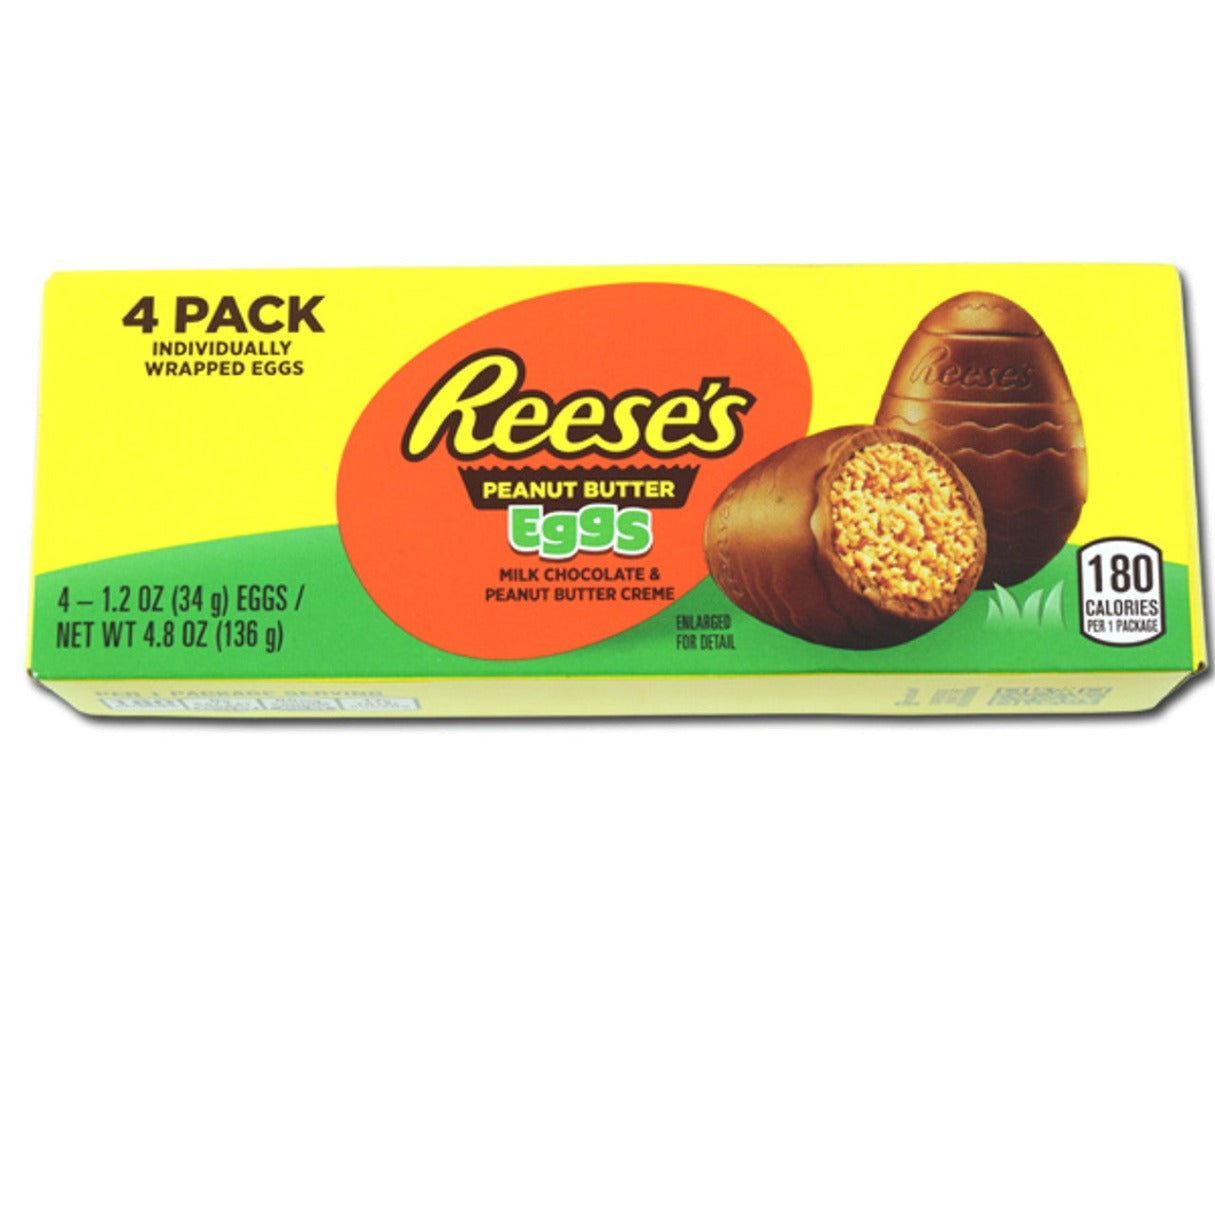 Reese's Peanut Butter Creme Eggs 1.2oz - 12ct